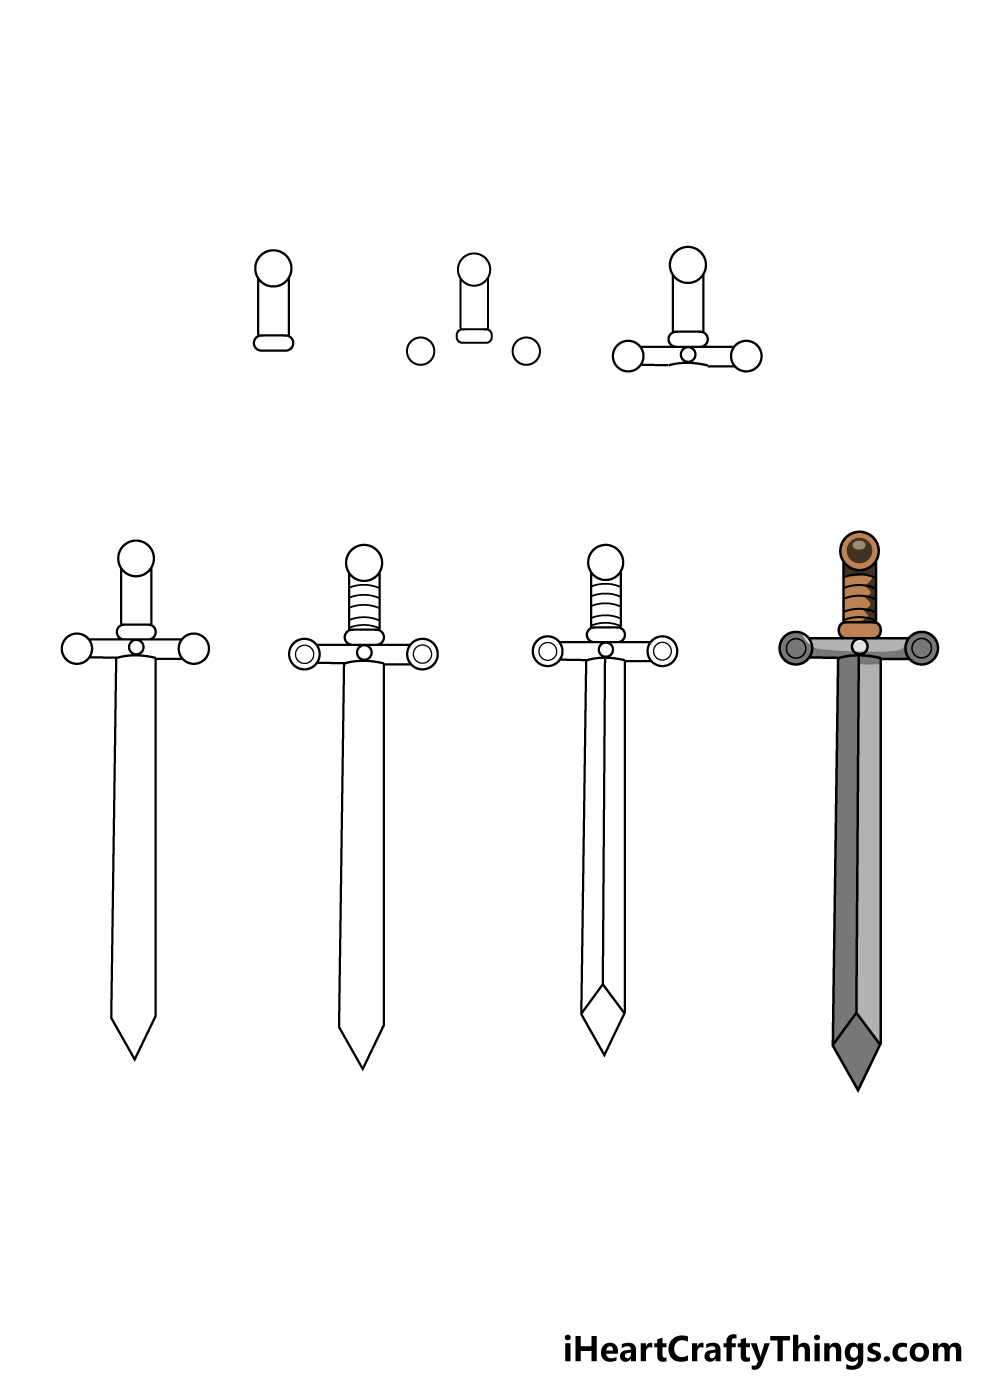 how to draw sword in 7 steps